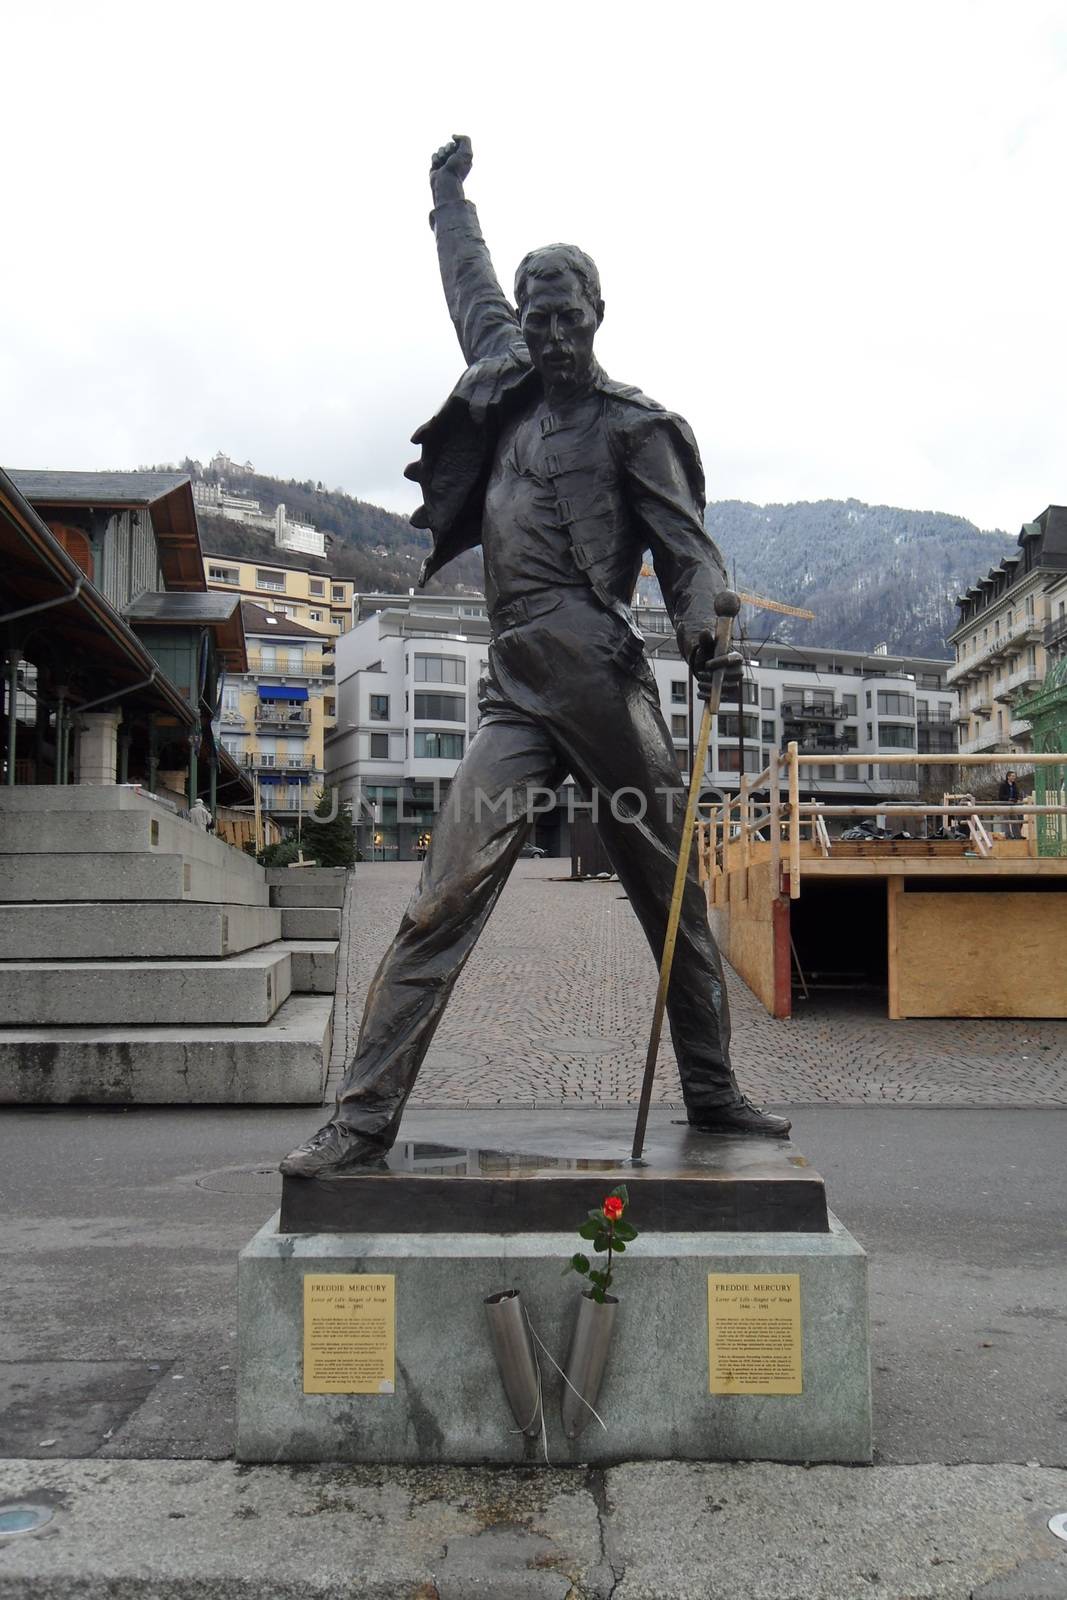 Statue of Freddie Mercury, frontman of Queen, in Montreux, Switzerland, a beautiful small town near to Geneva lake by matteobartolini